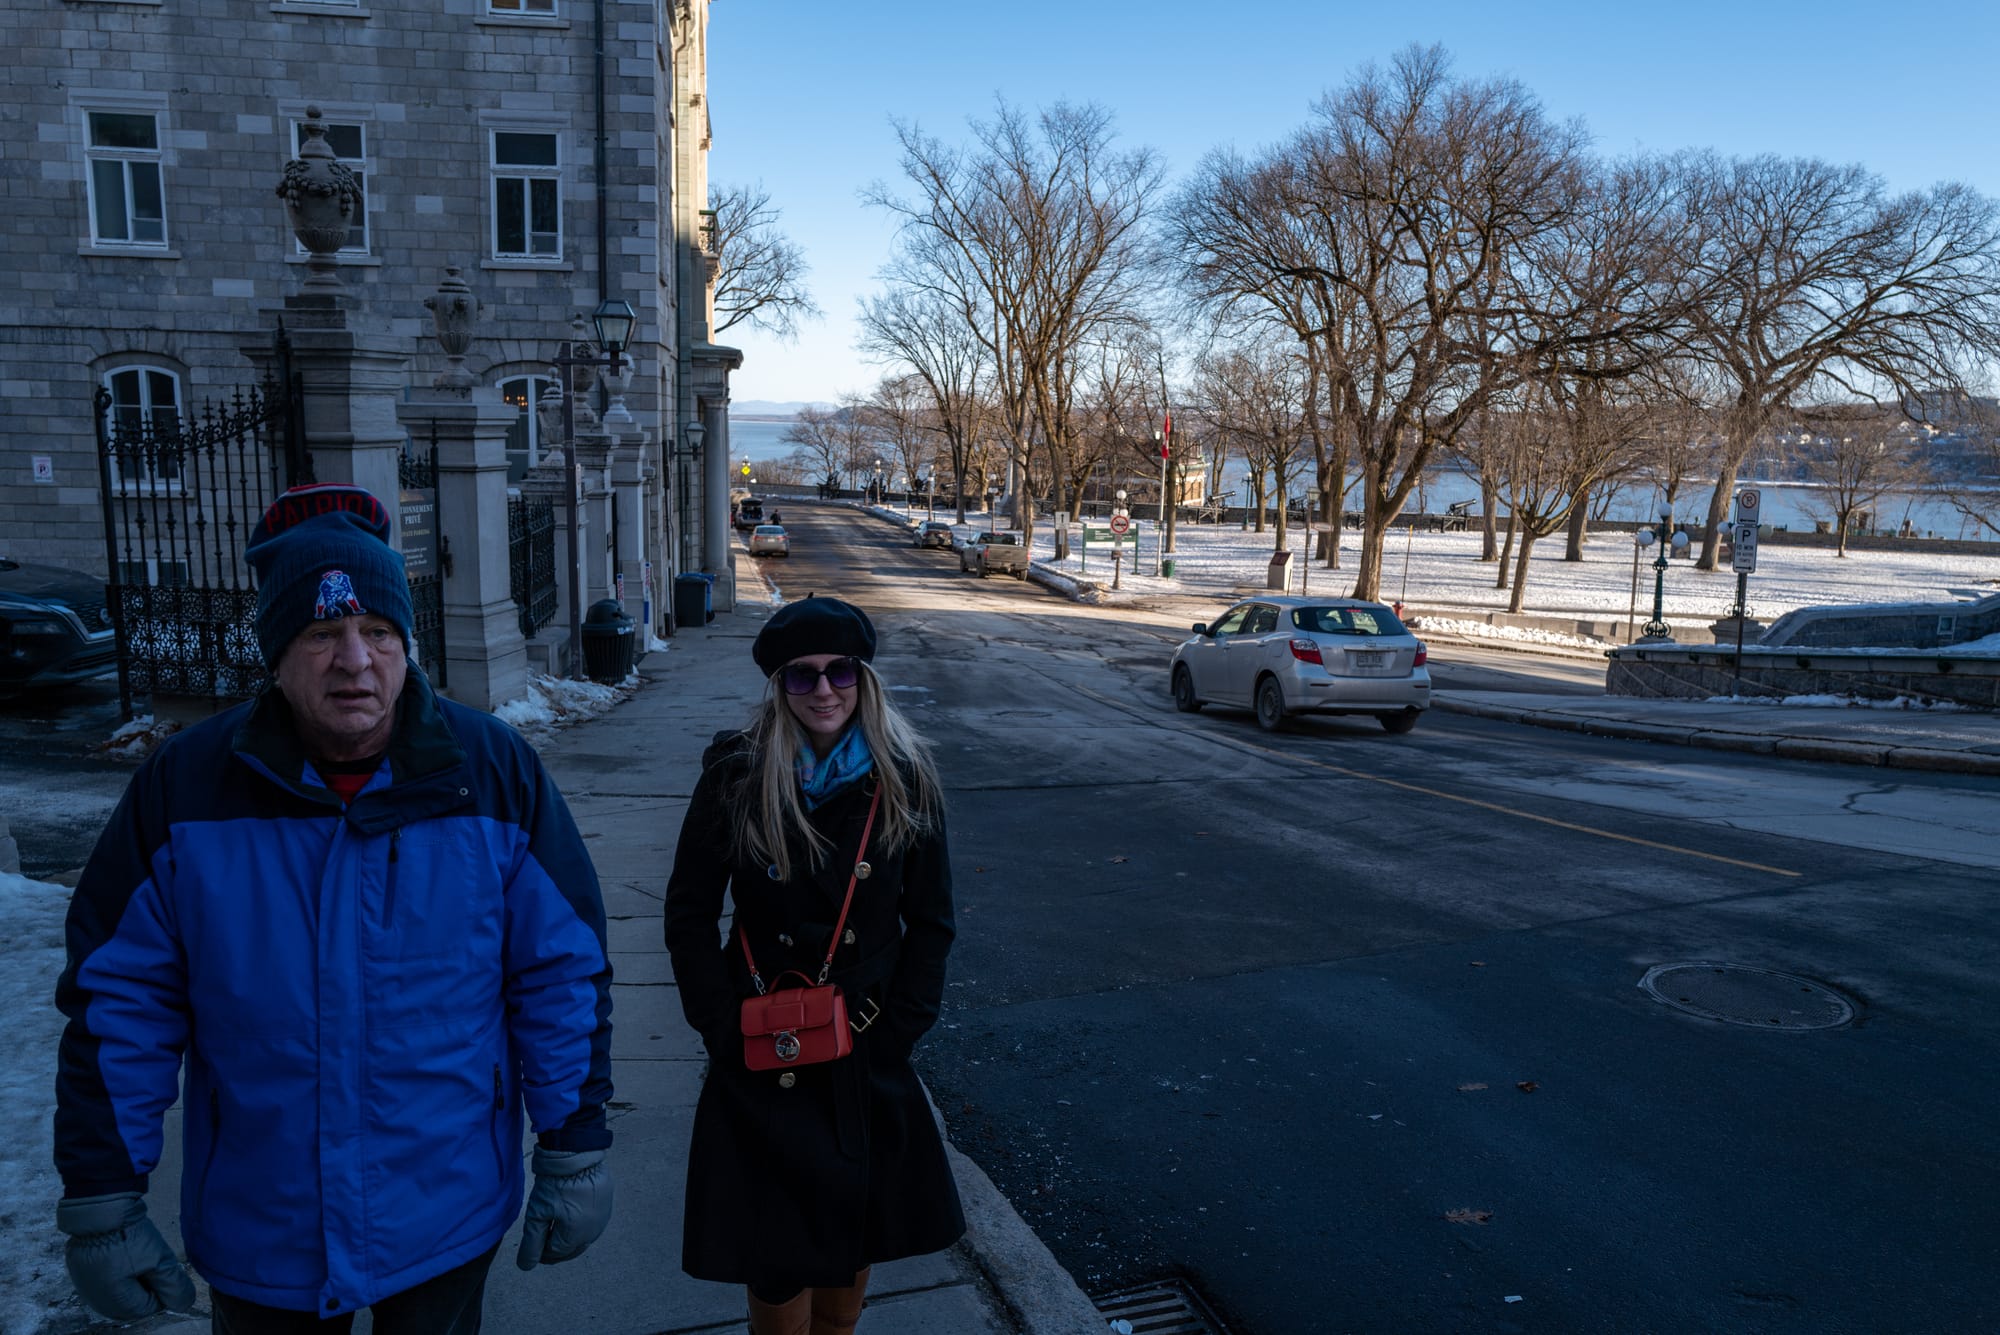 A Magical Christmas Weekend in Old Quebec City